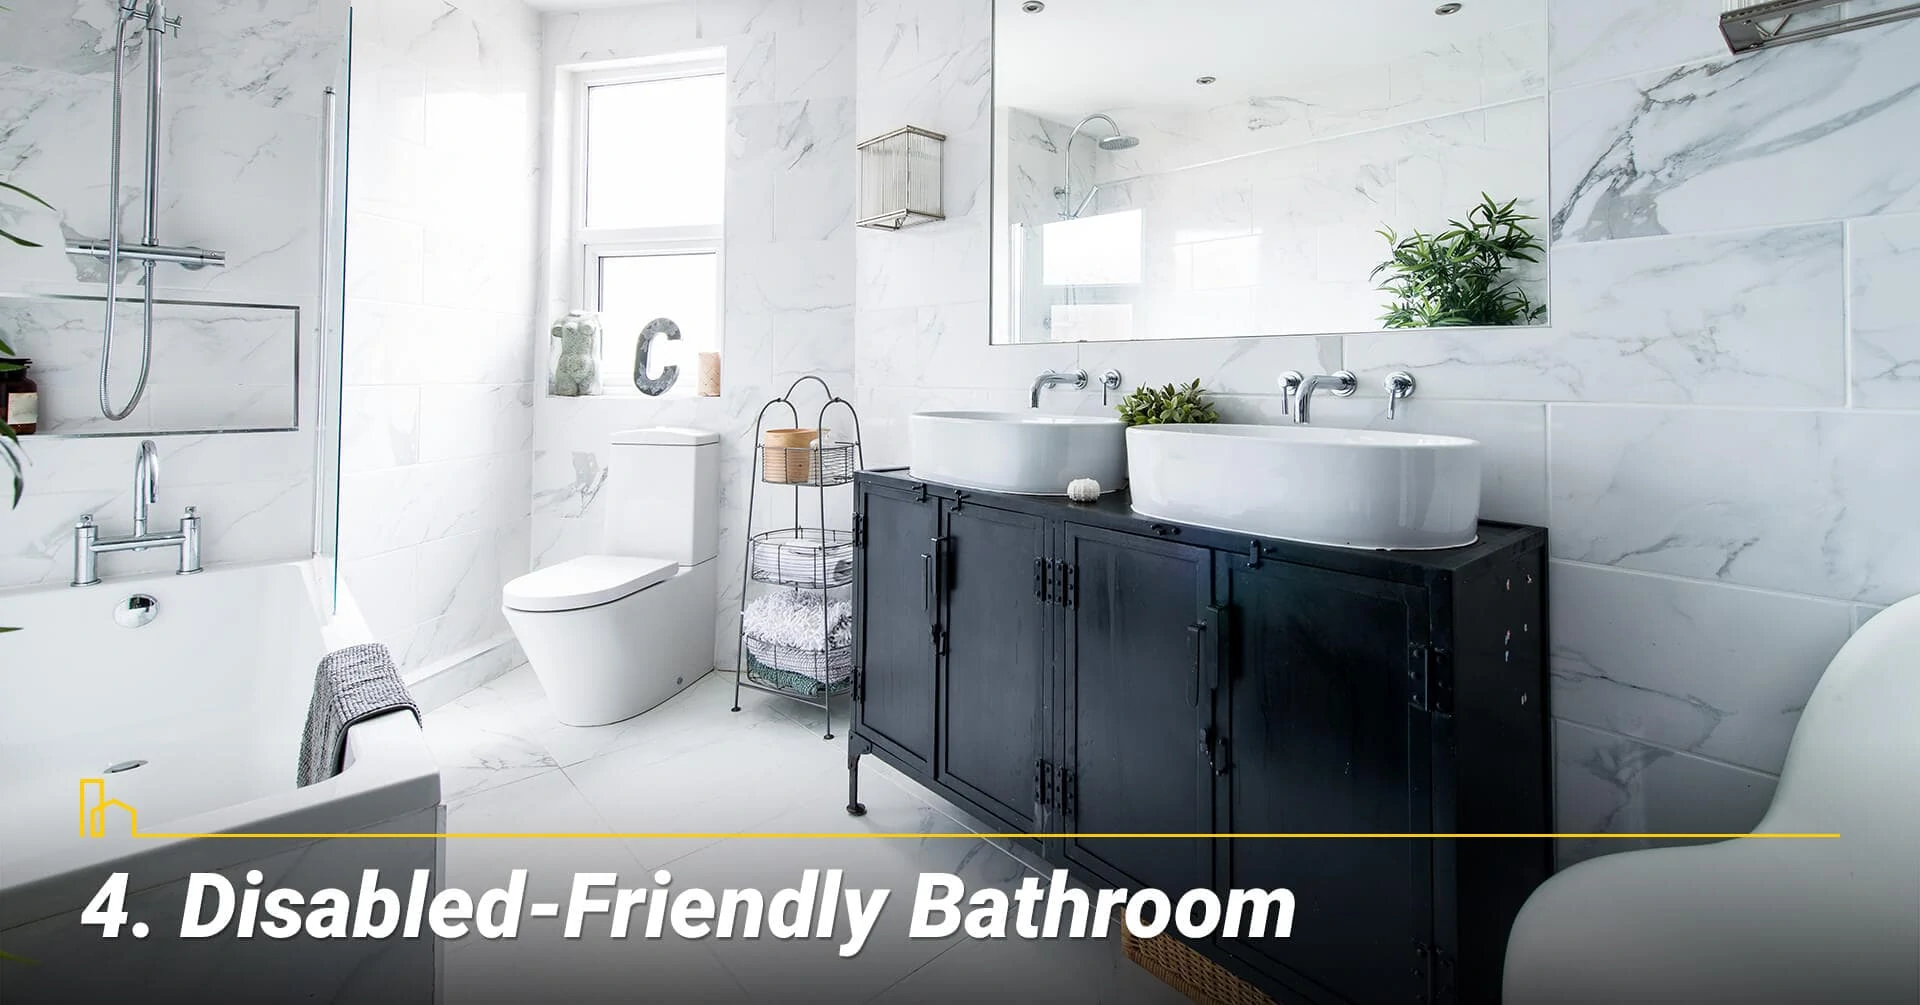 Disabled-Friendly Bathroom, make your bathroom easy for person with disability to access